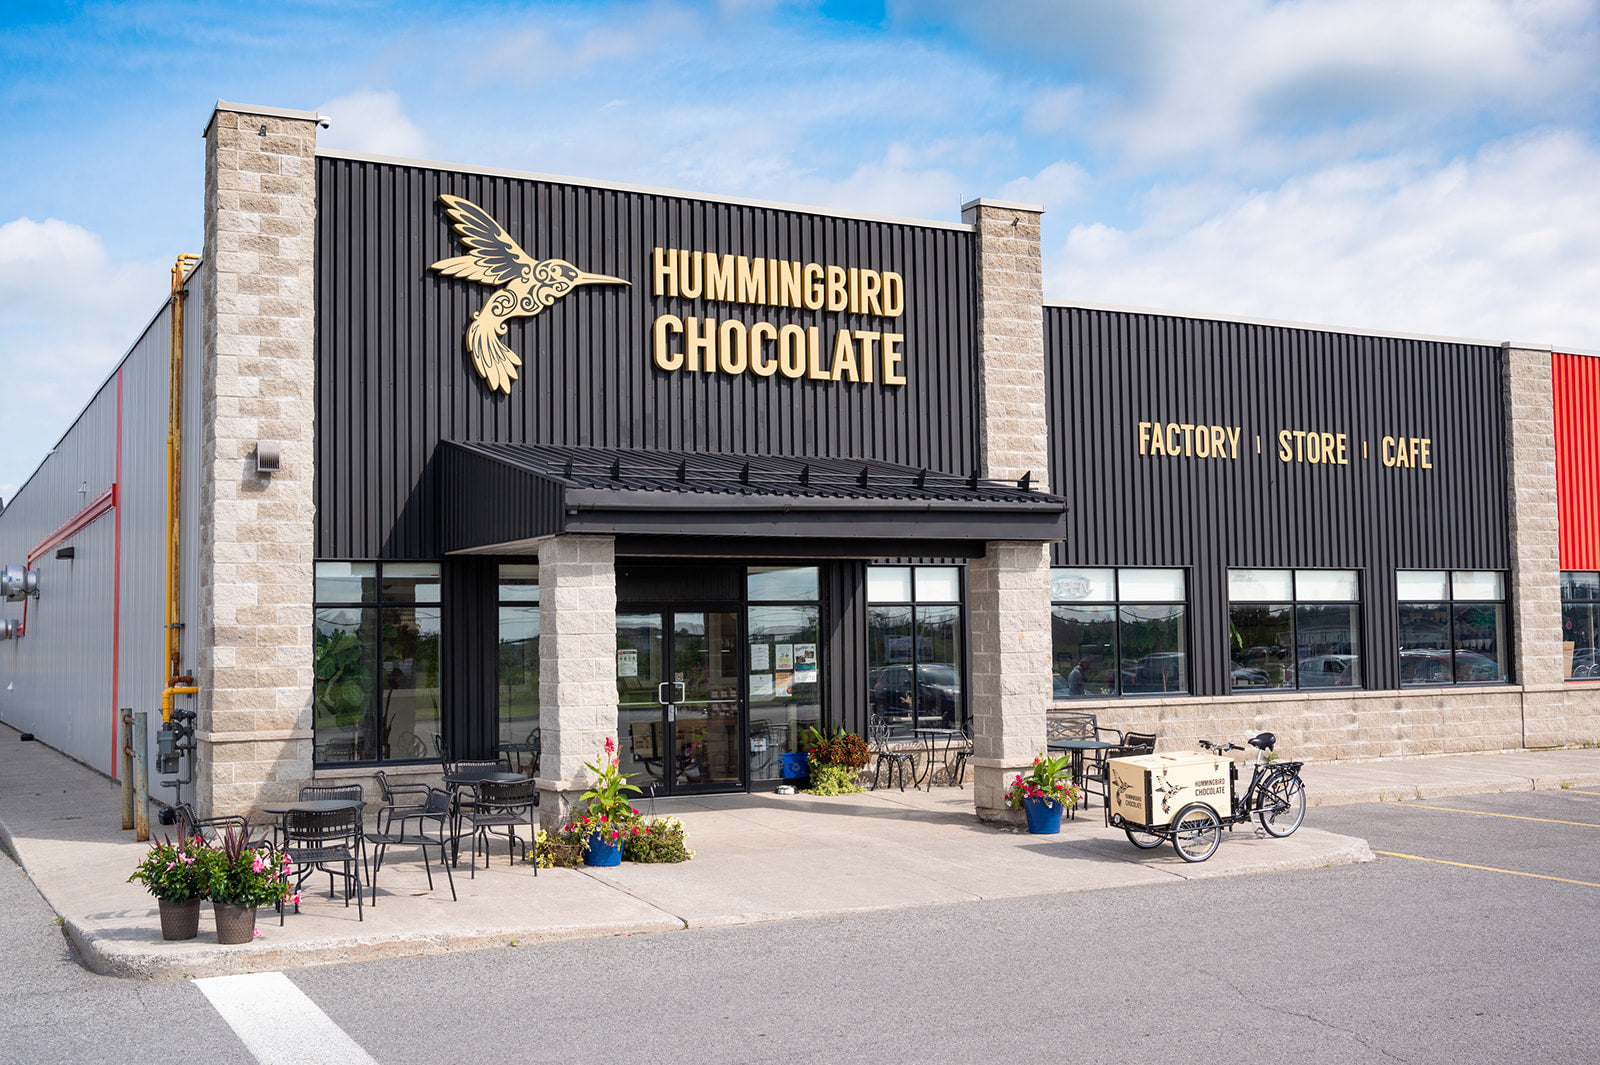 Hummingbird Chocolate Maker's chocolate factory, store and cafe from the outside.